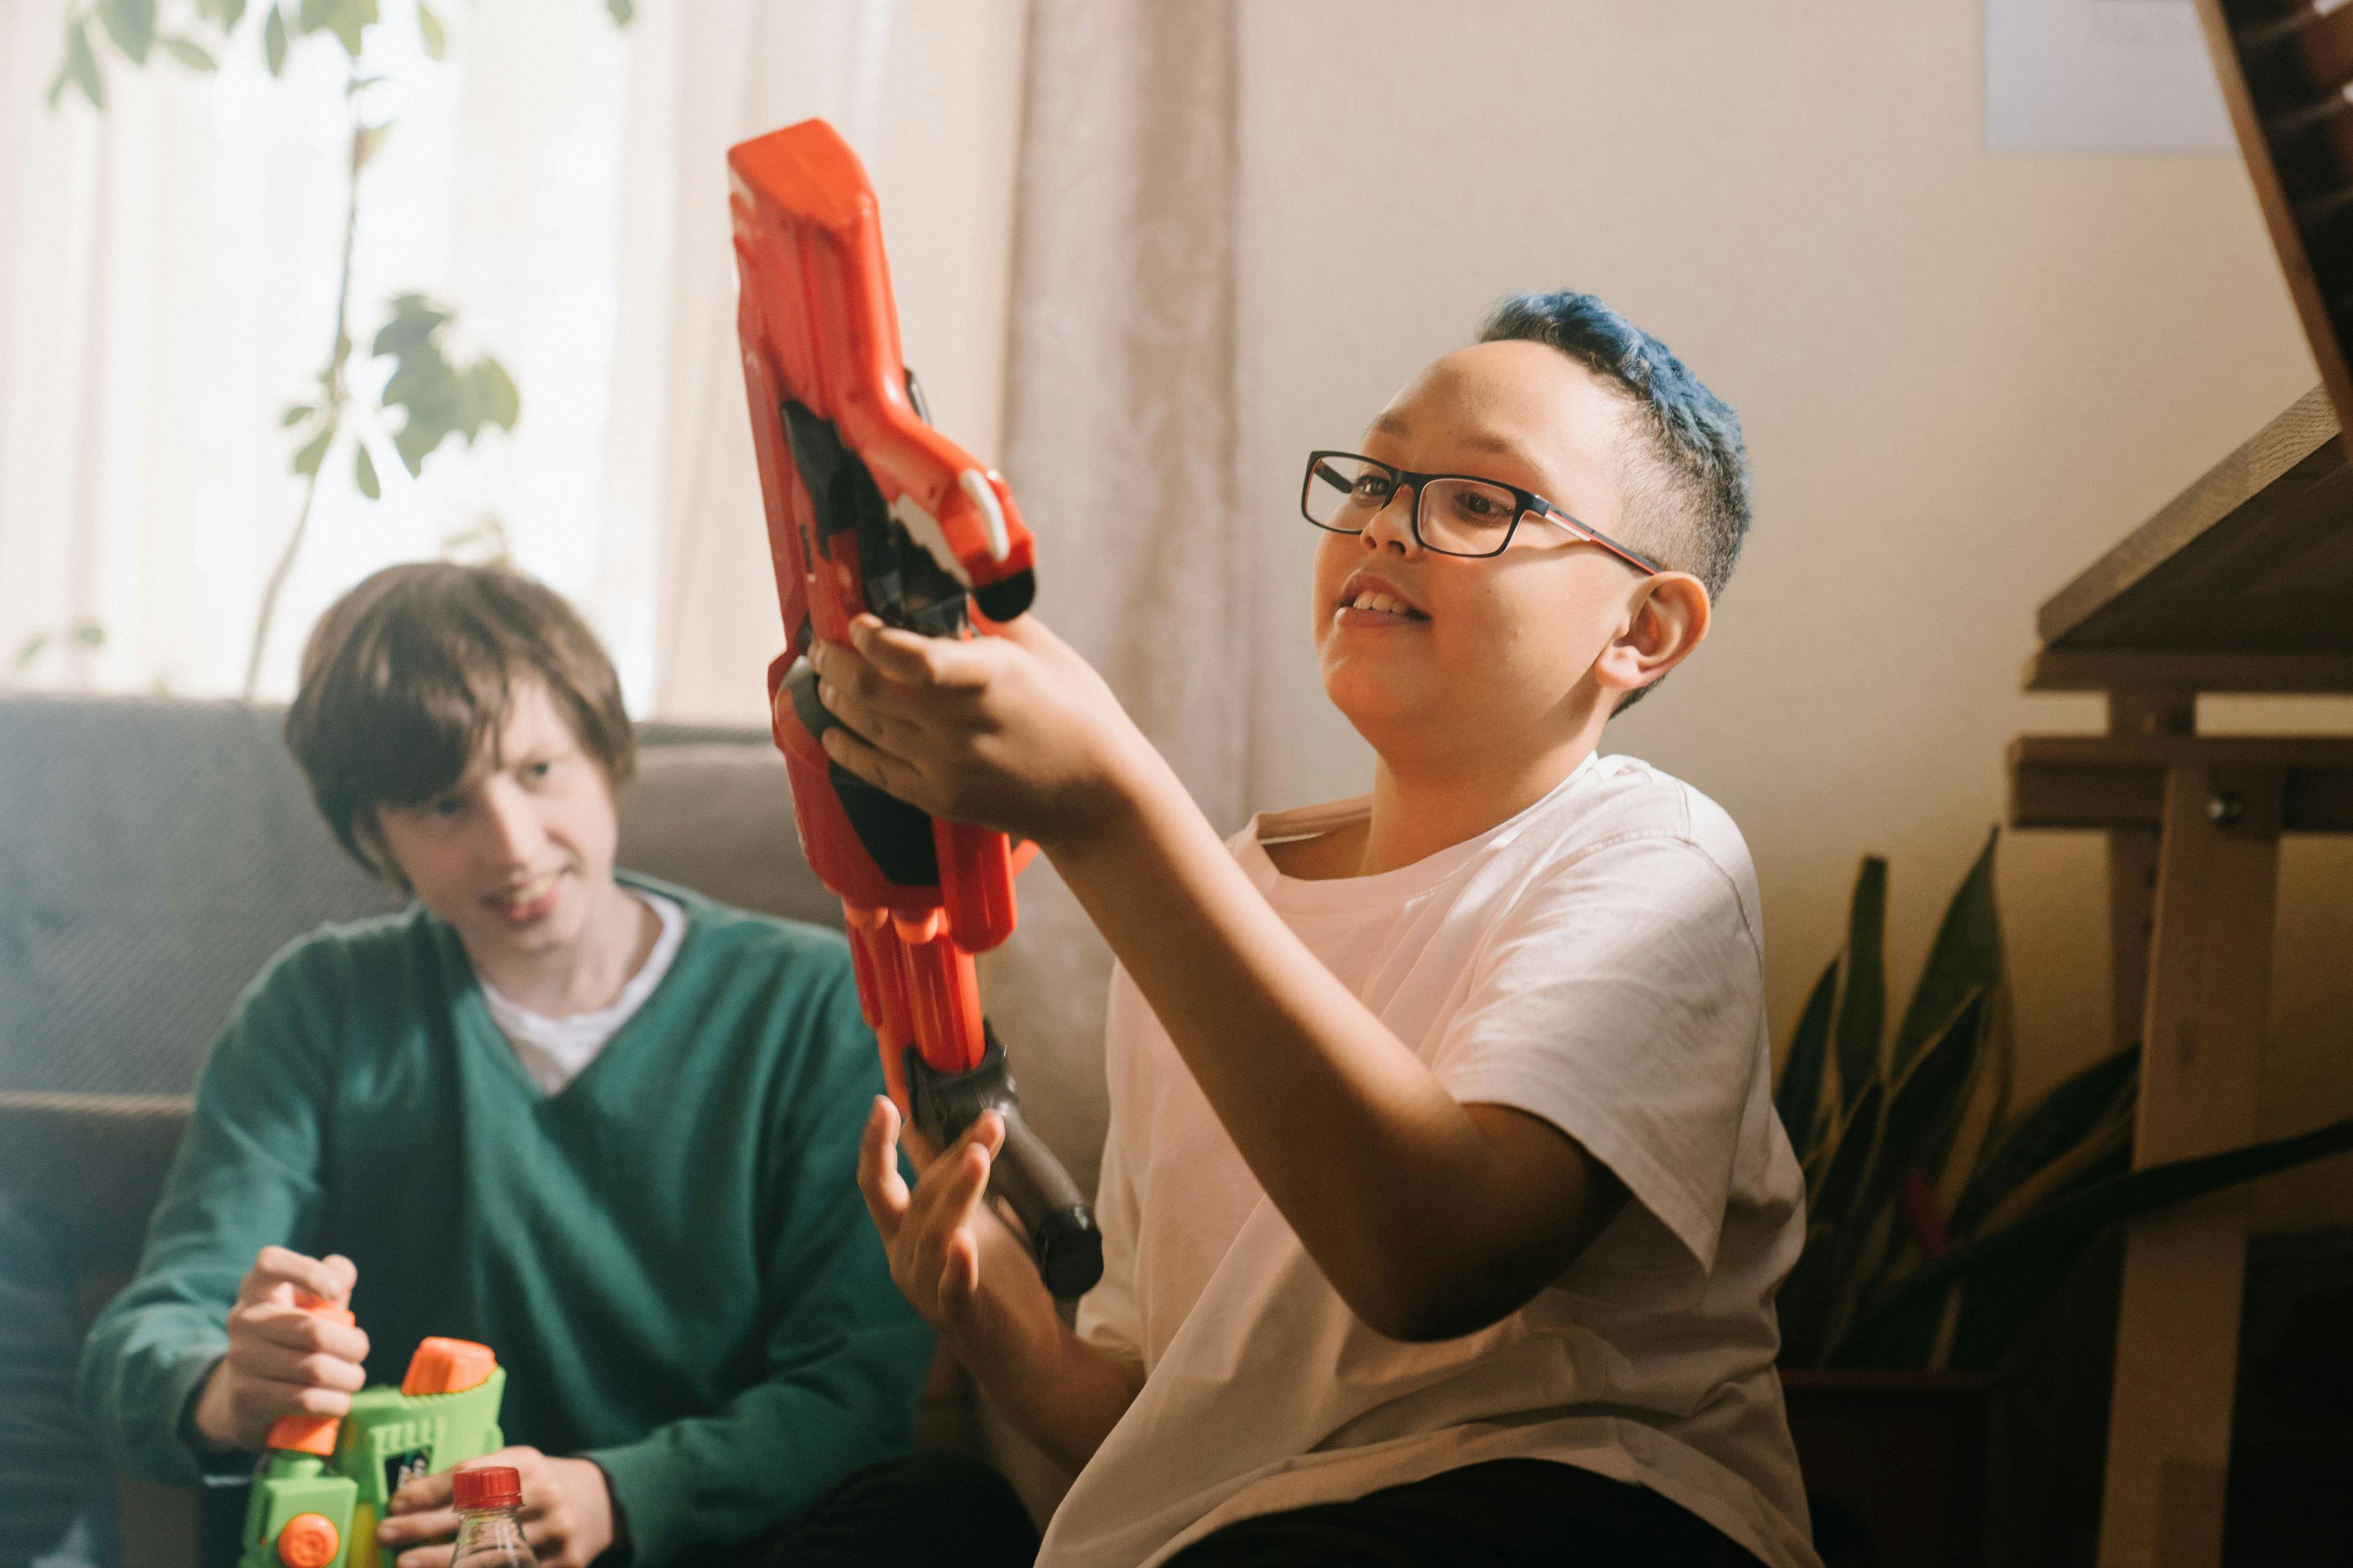 Boys with water guns | Source: Pexels